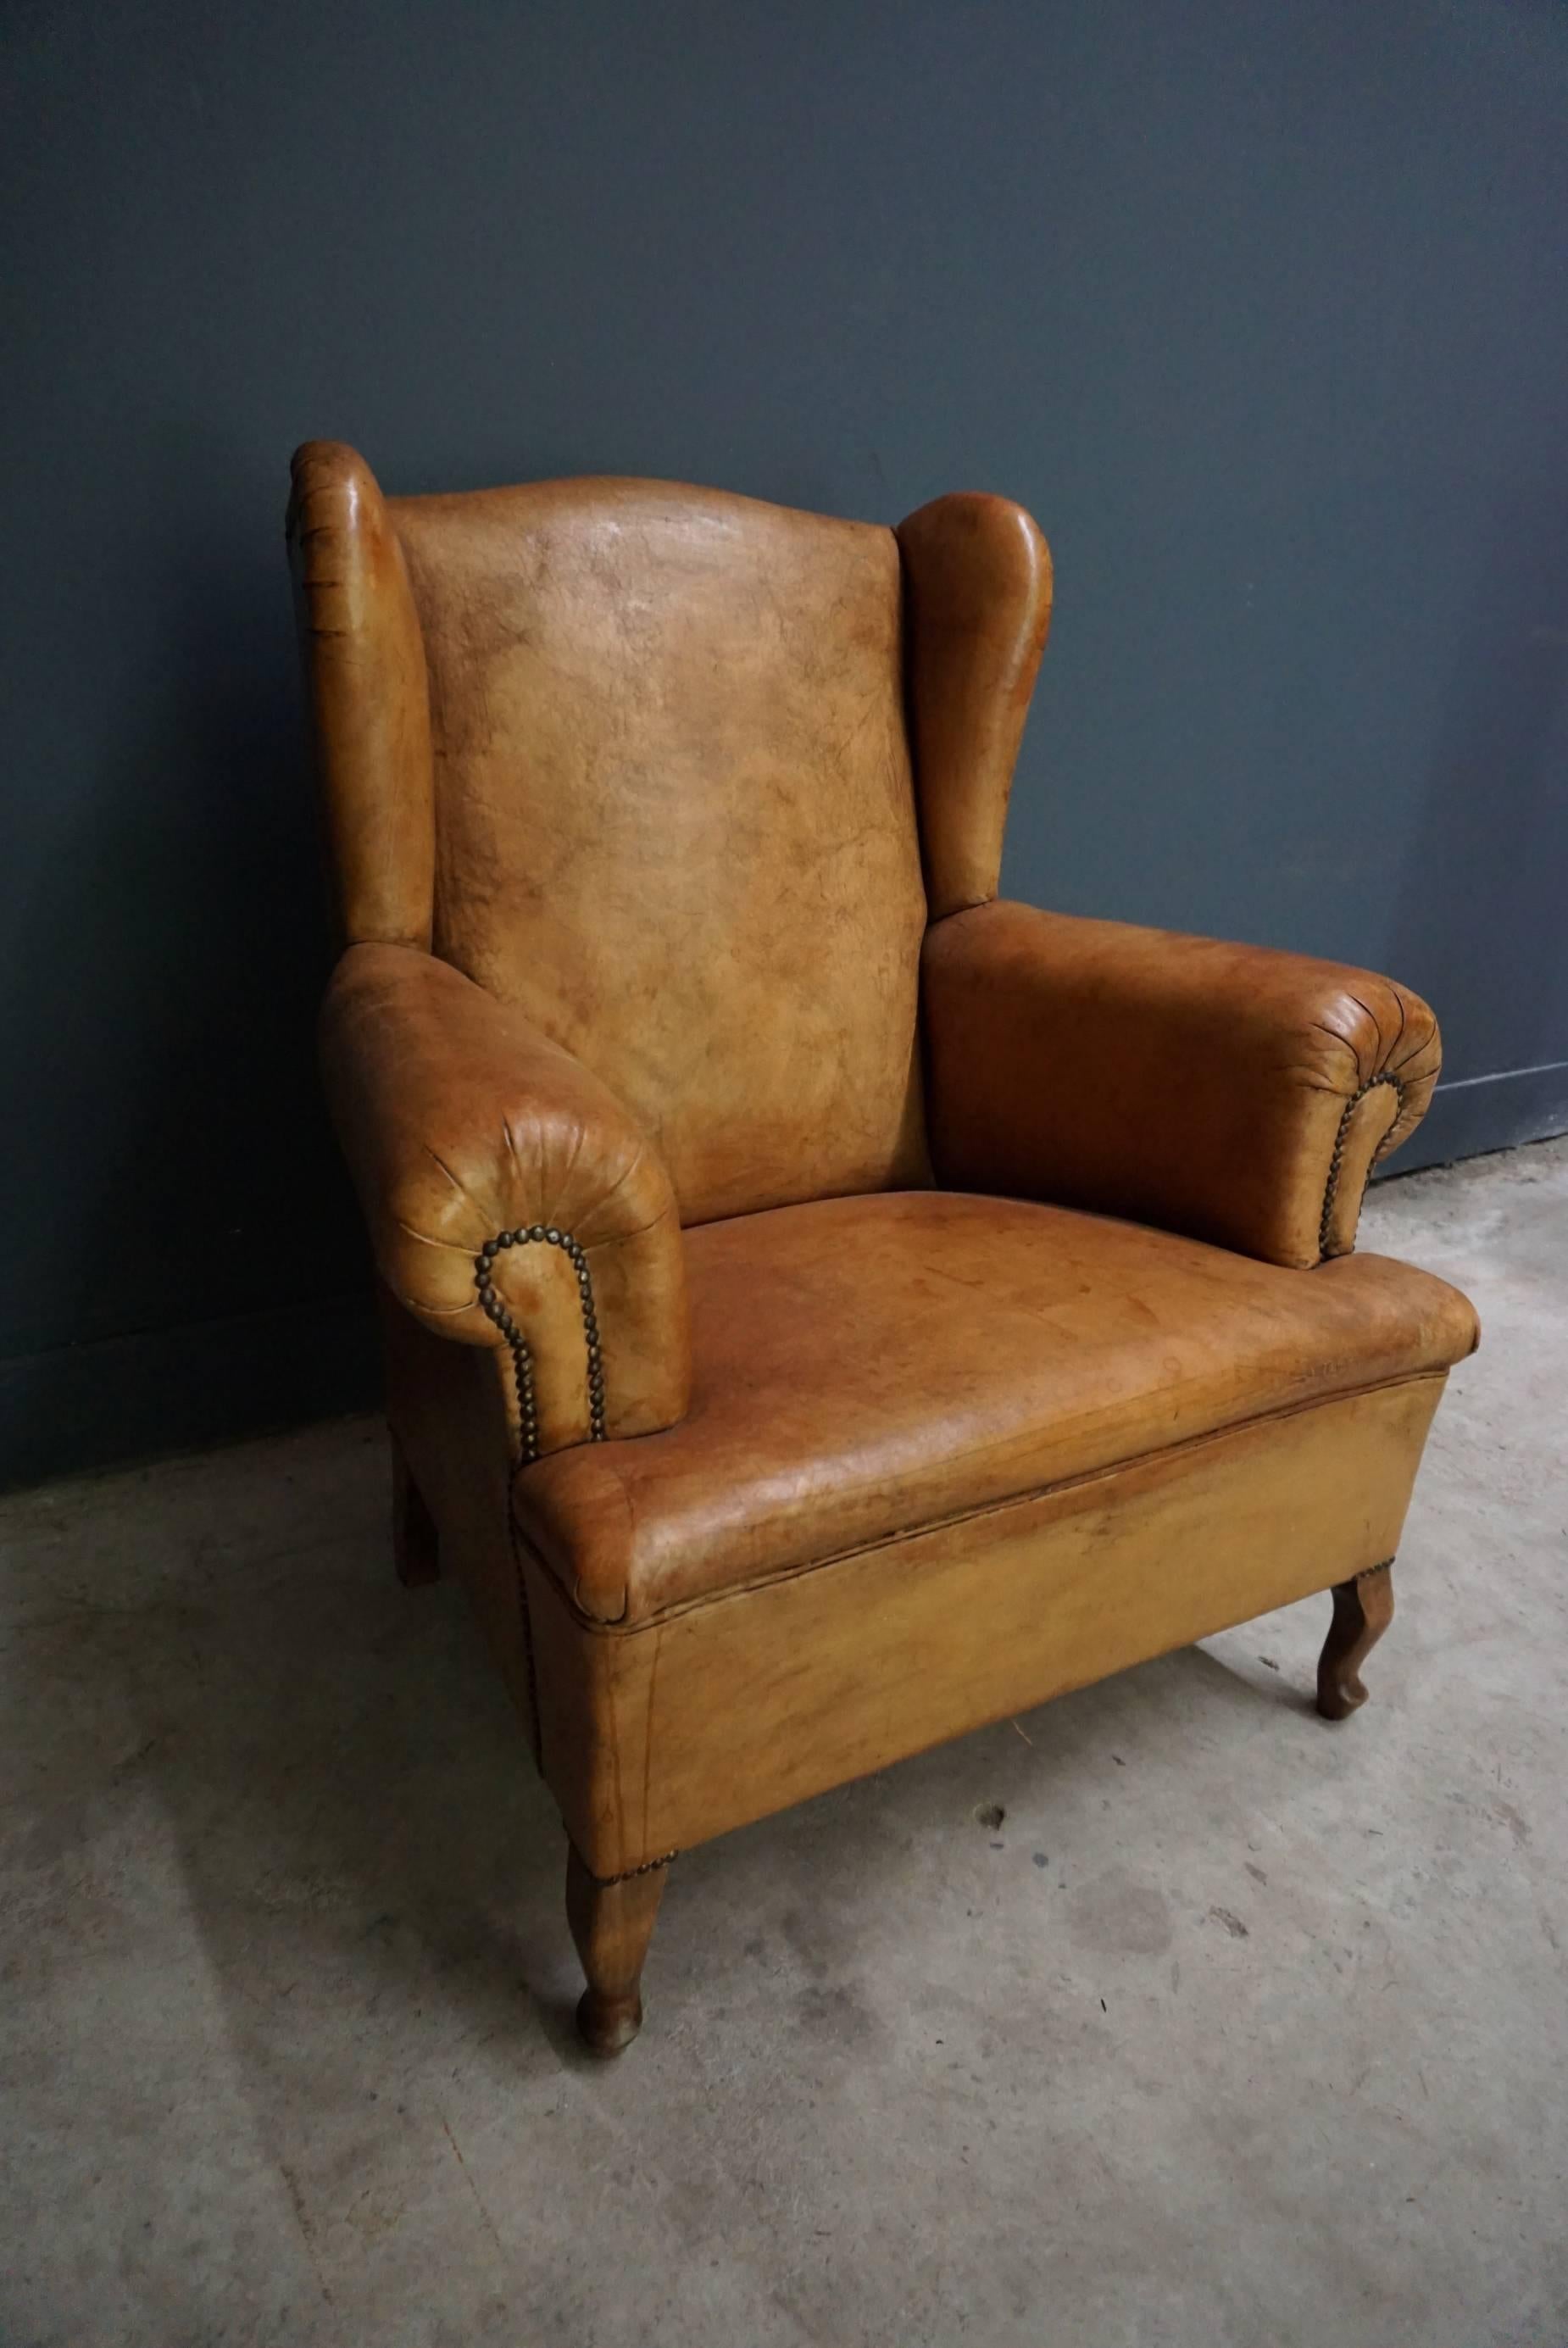 This club chair is upholstered with cognac-colored leather and features metal pins and wooden legs.